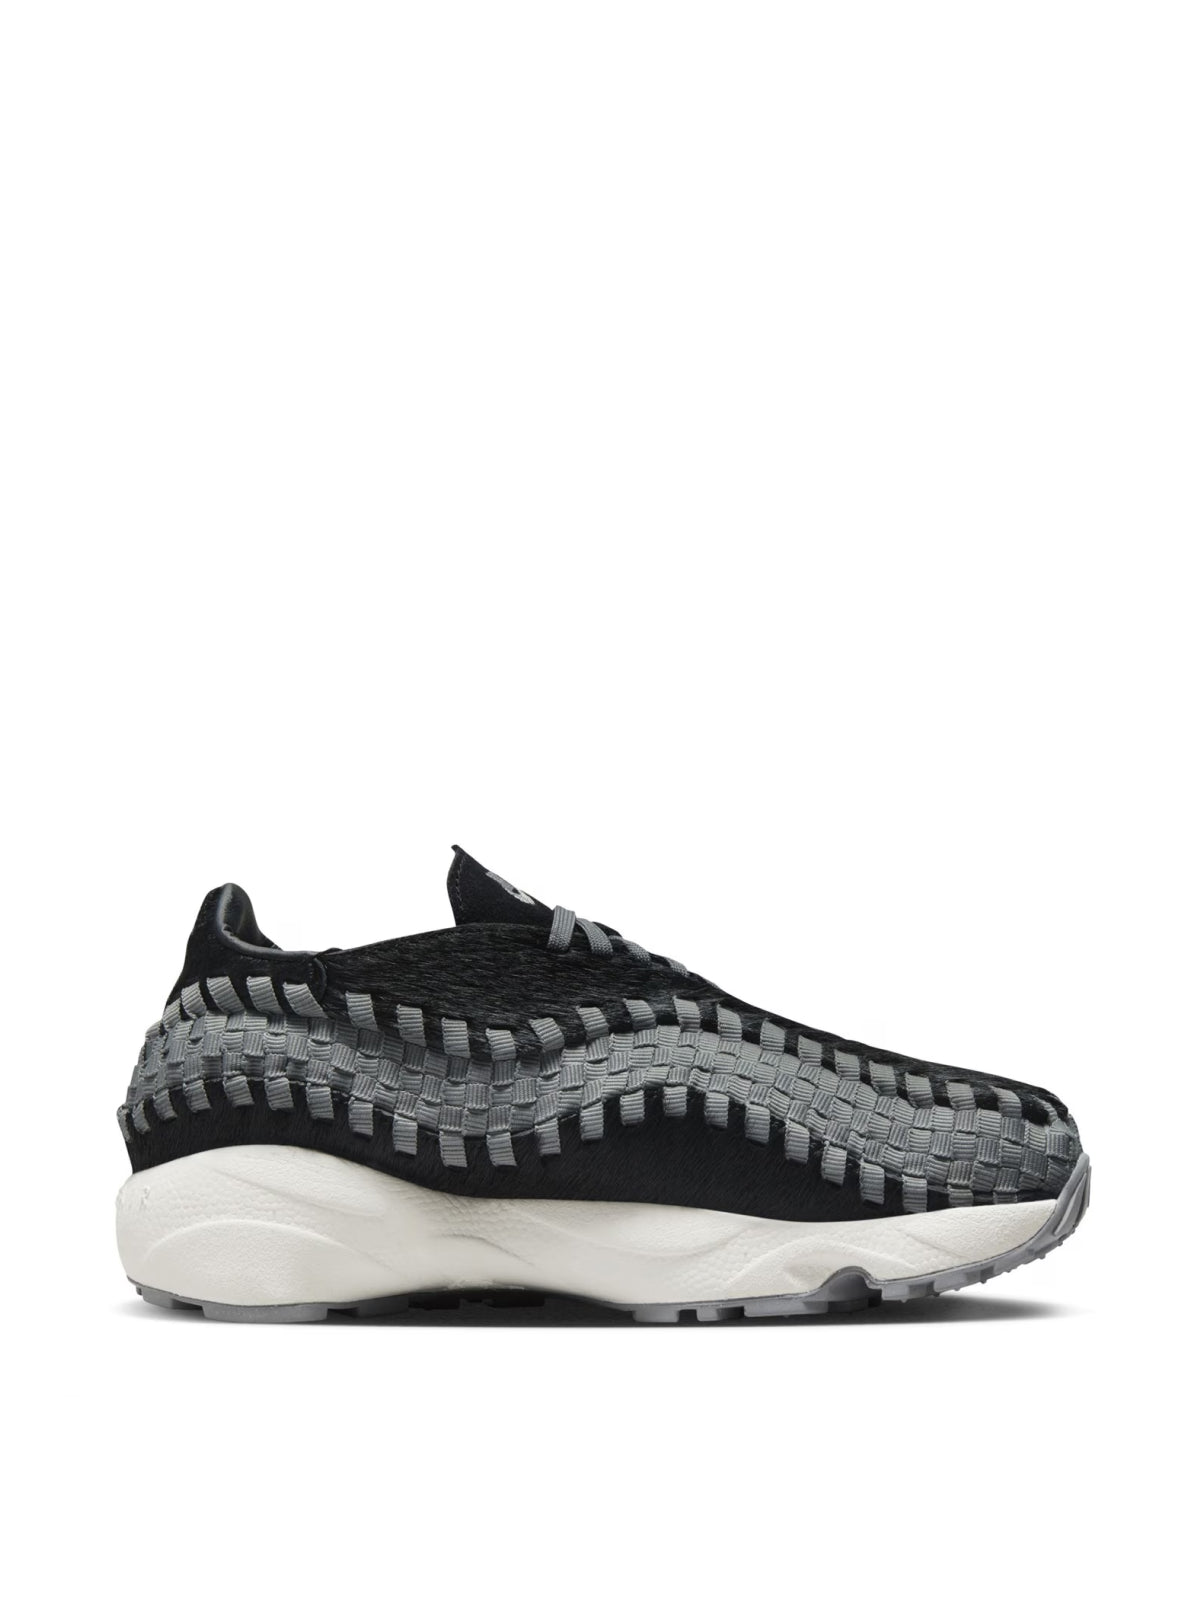 Nike-OUTLET-SALE-Air Footscape Sneakers-ARCHIVIST